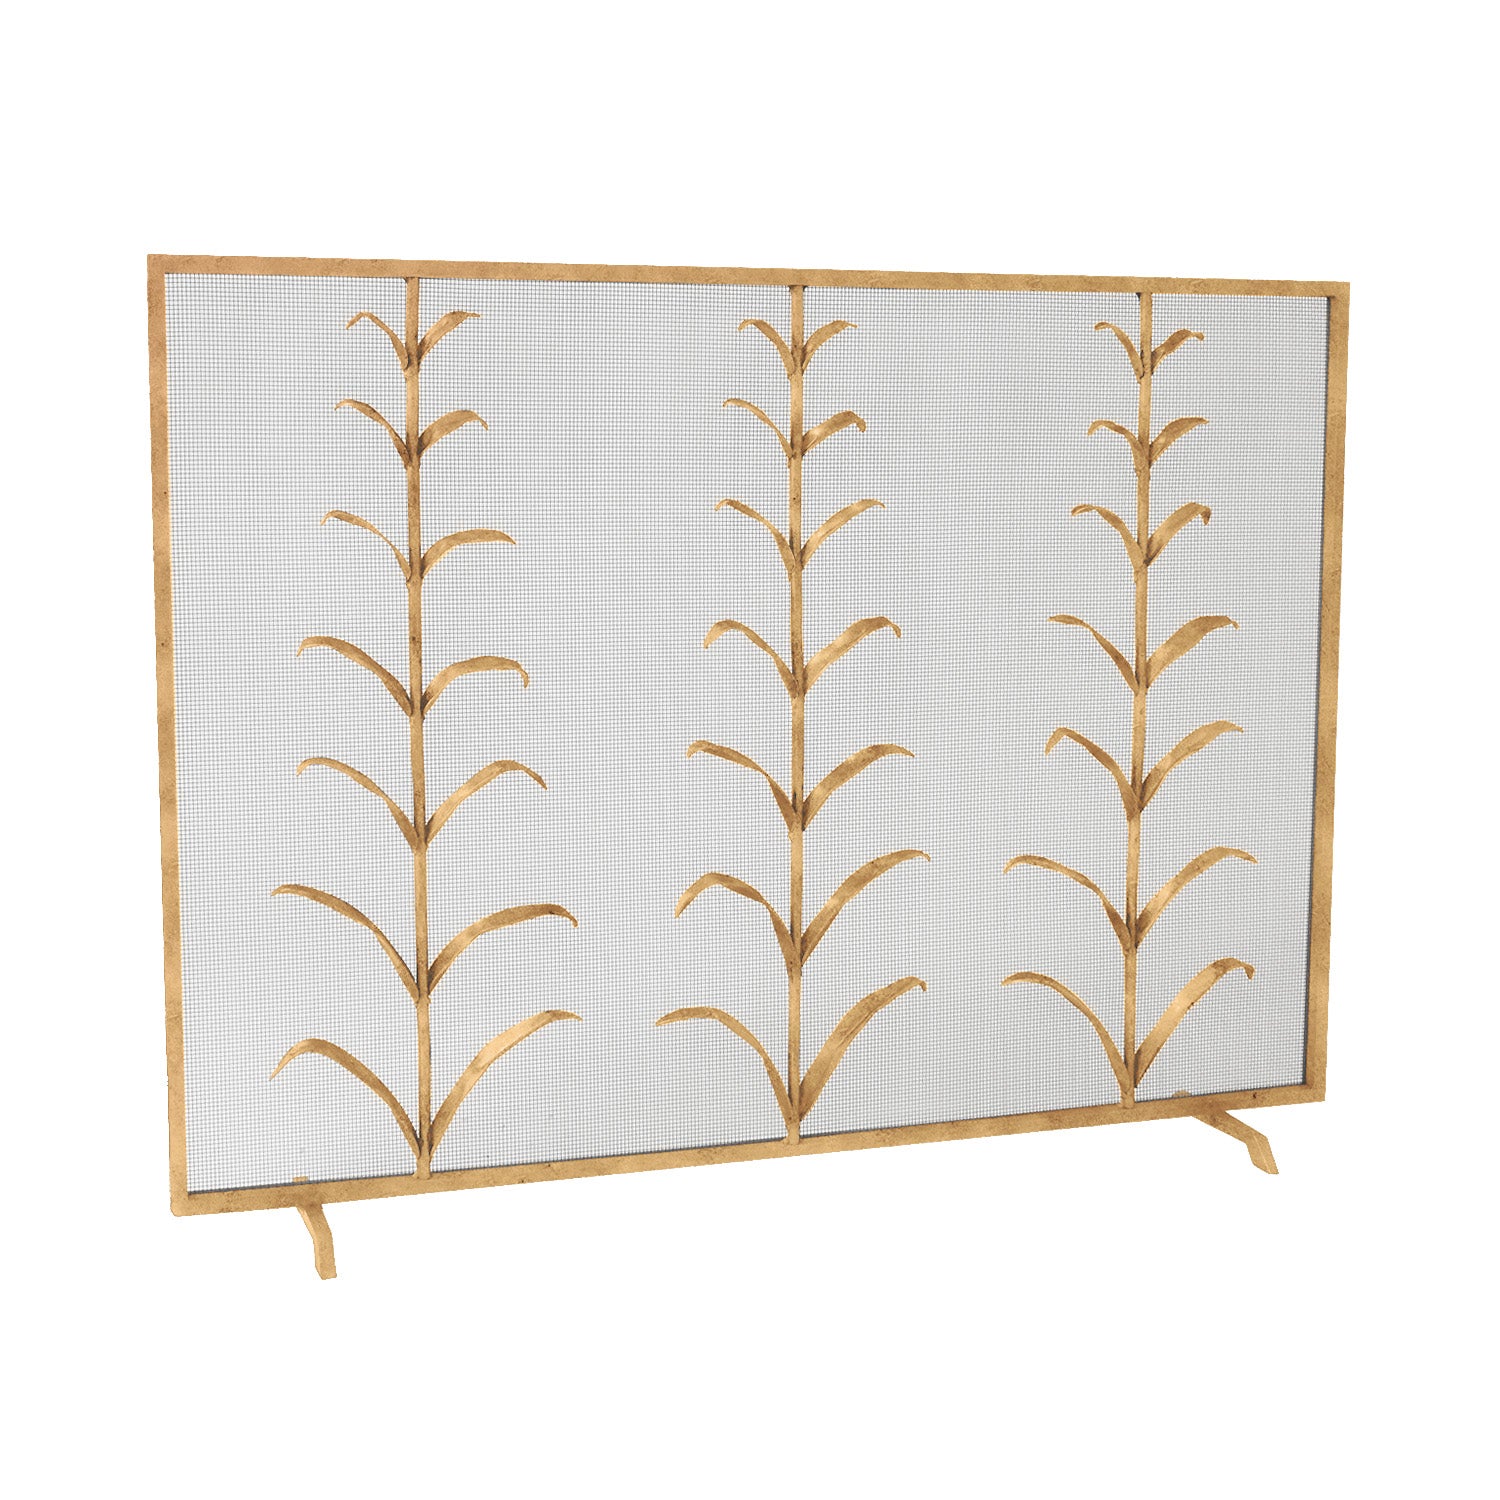 Lily Stems Fireplace Screen